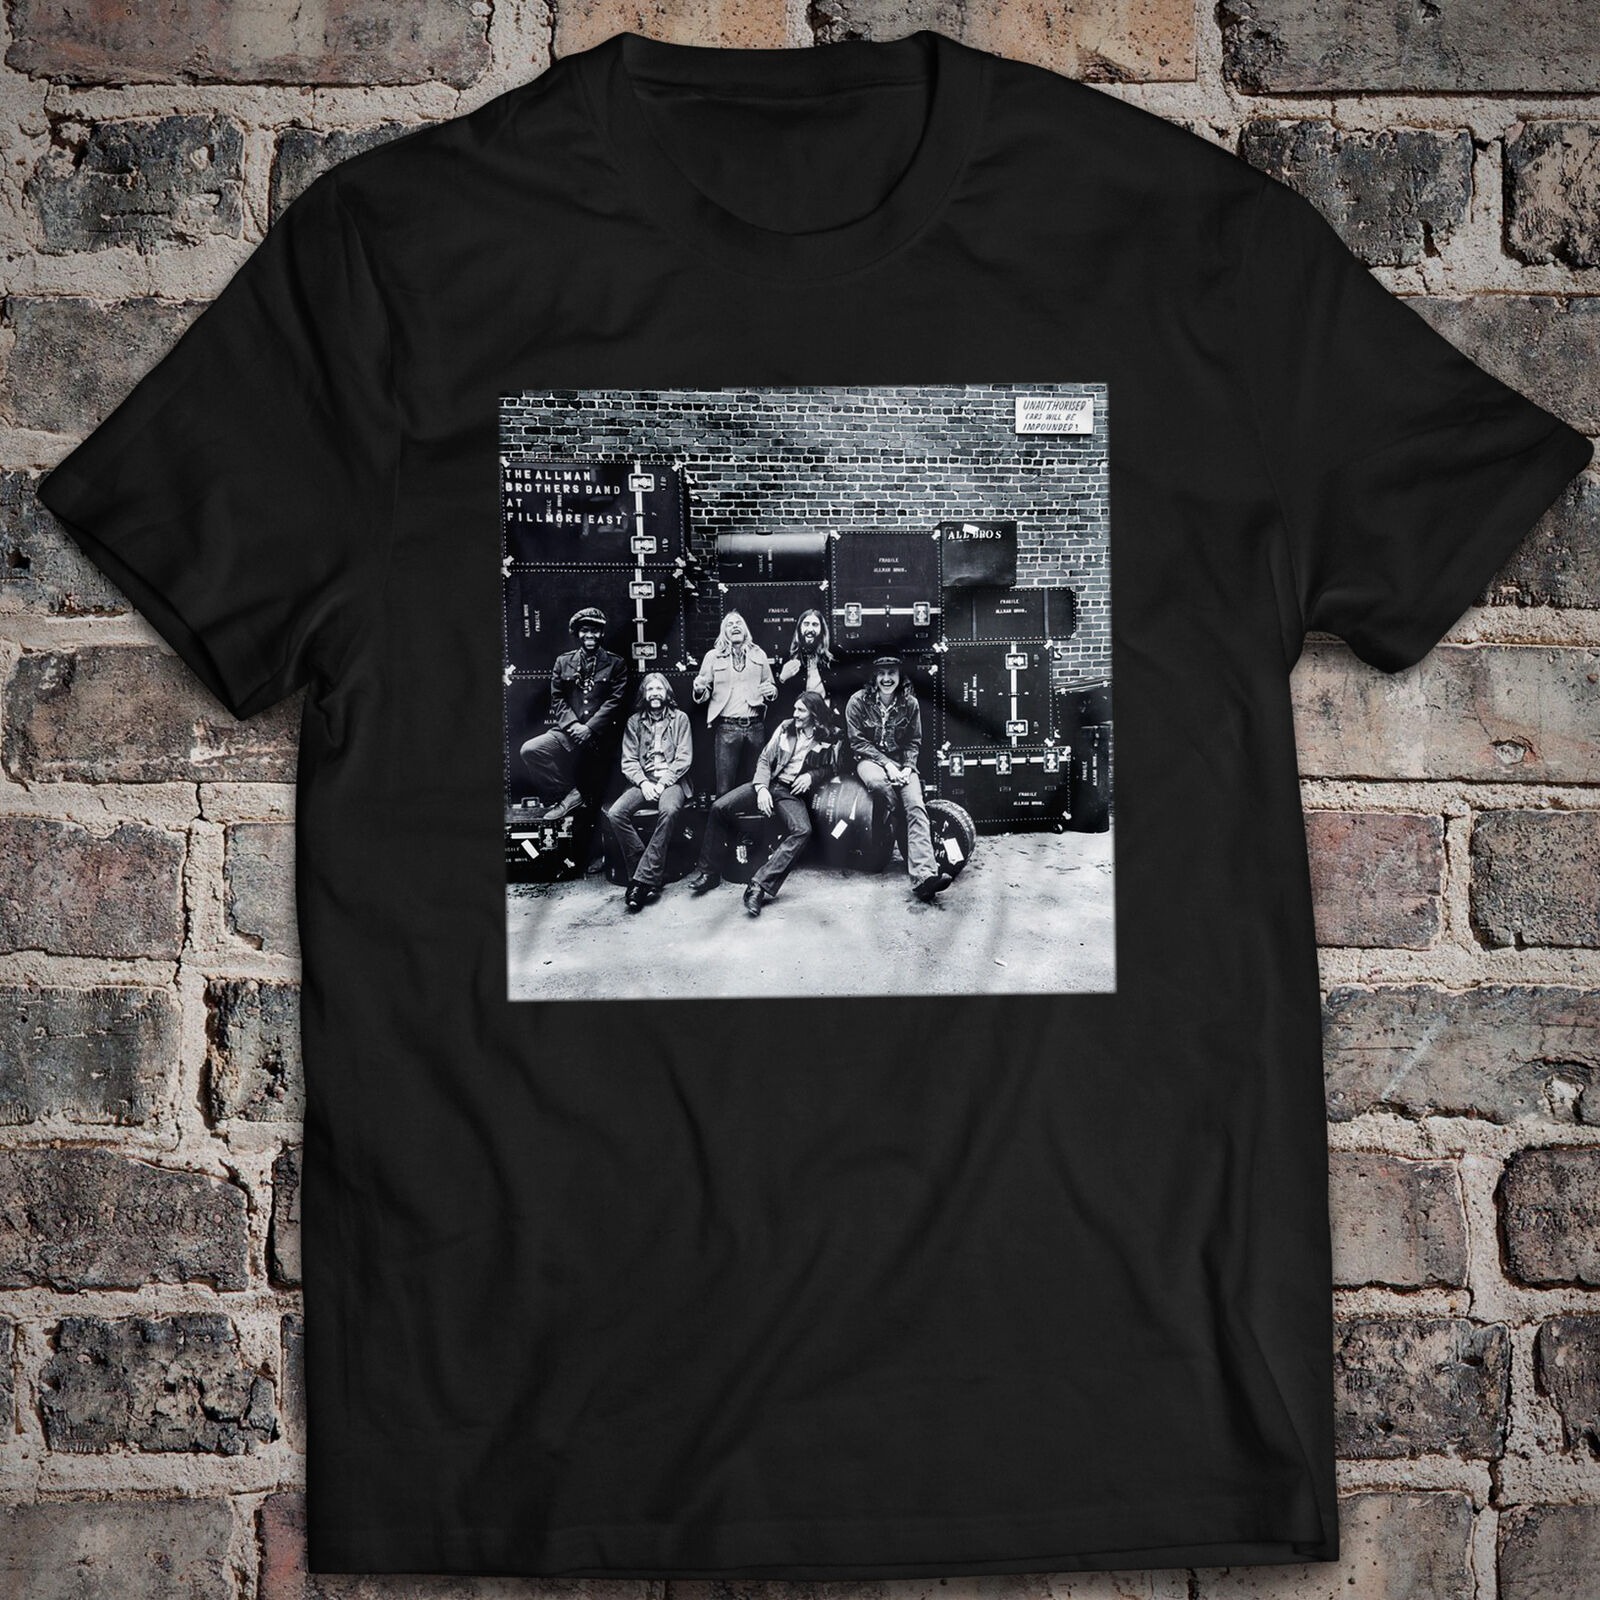 Classic Music T-Shirt At Fillmore East The Allman Brothers Band Statesboro Blues